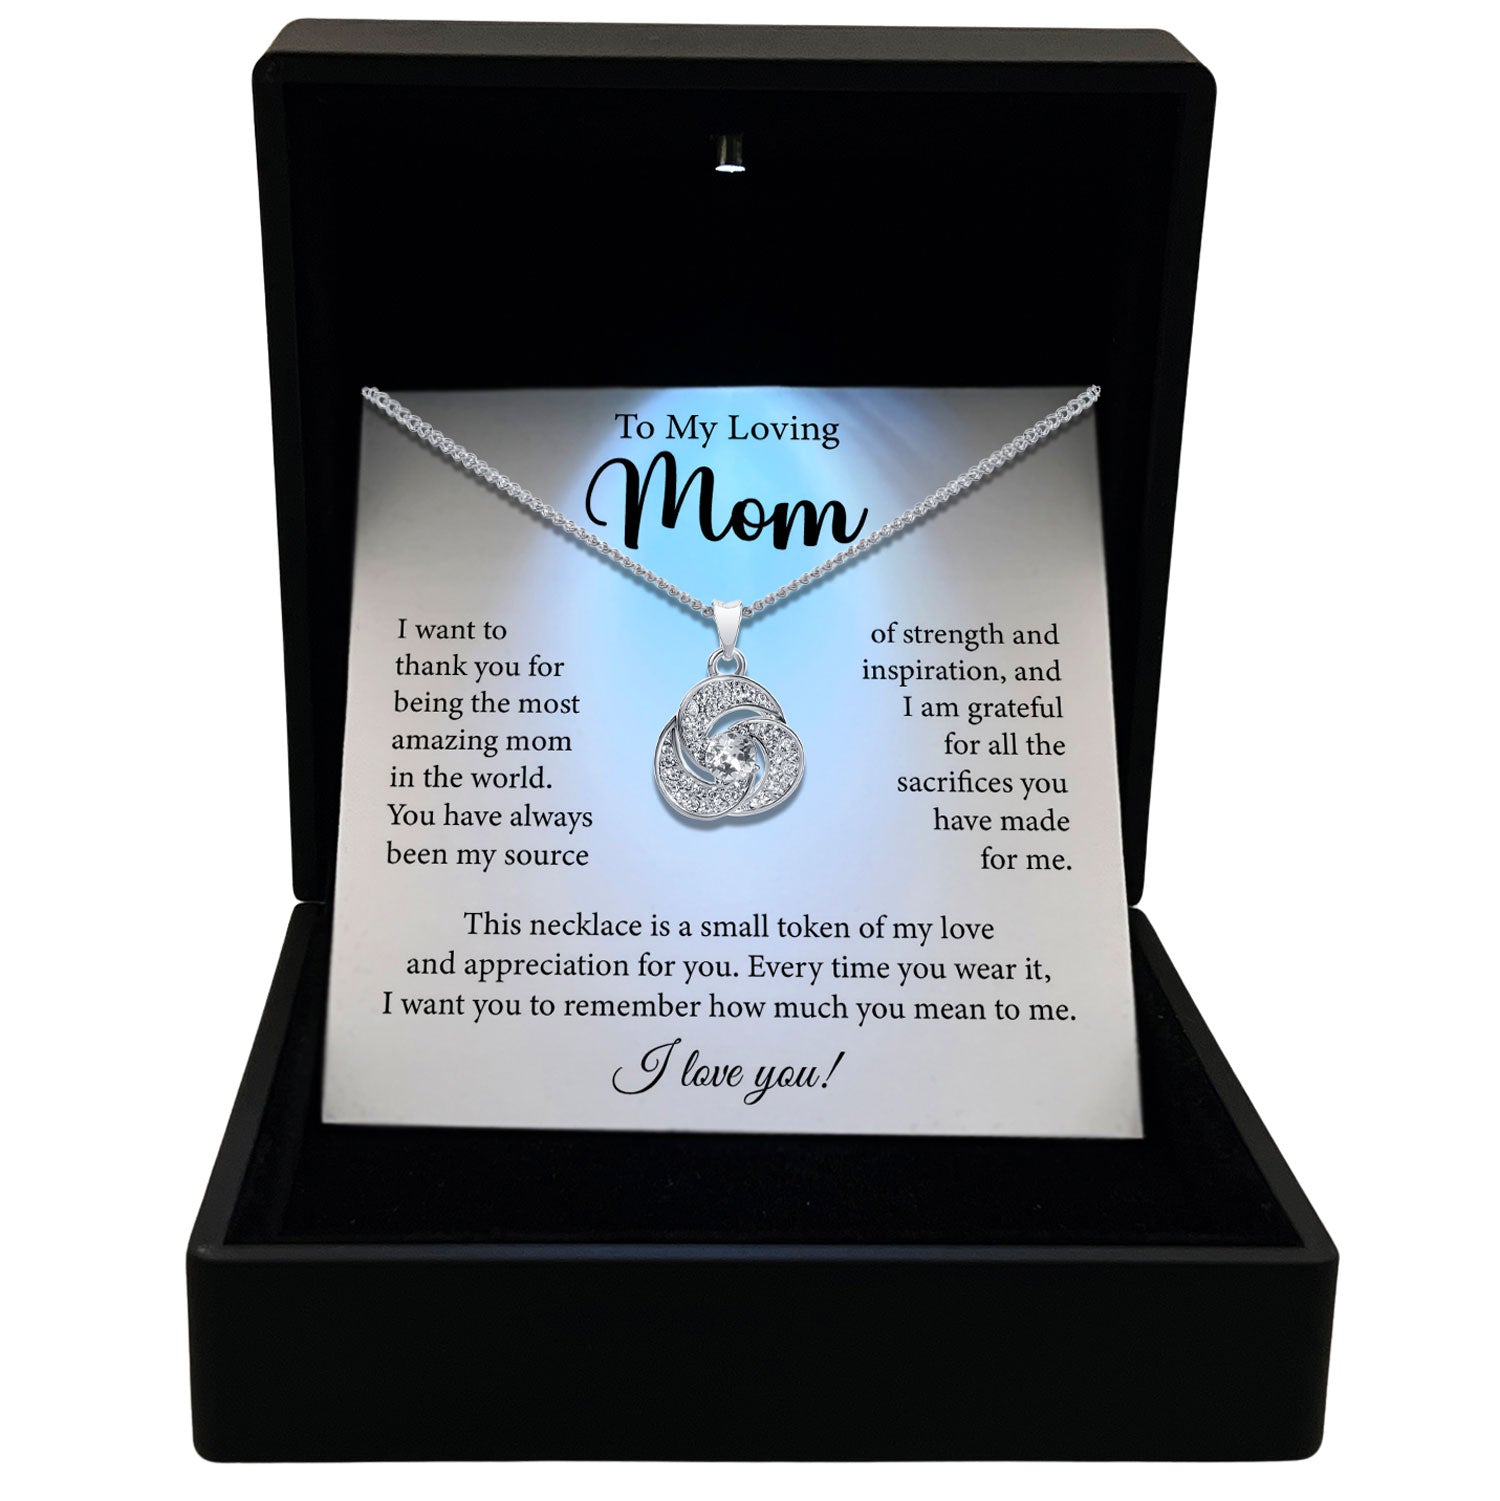 To My Loving Mom - You Have Always Been My Source Of Strength & Inspiration - Tryndi Love Knot Necklace